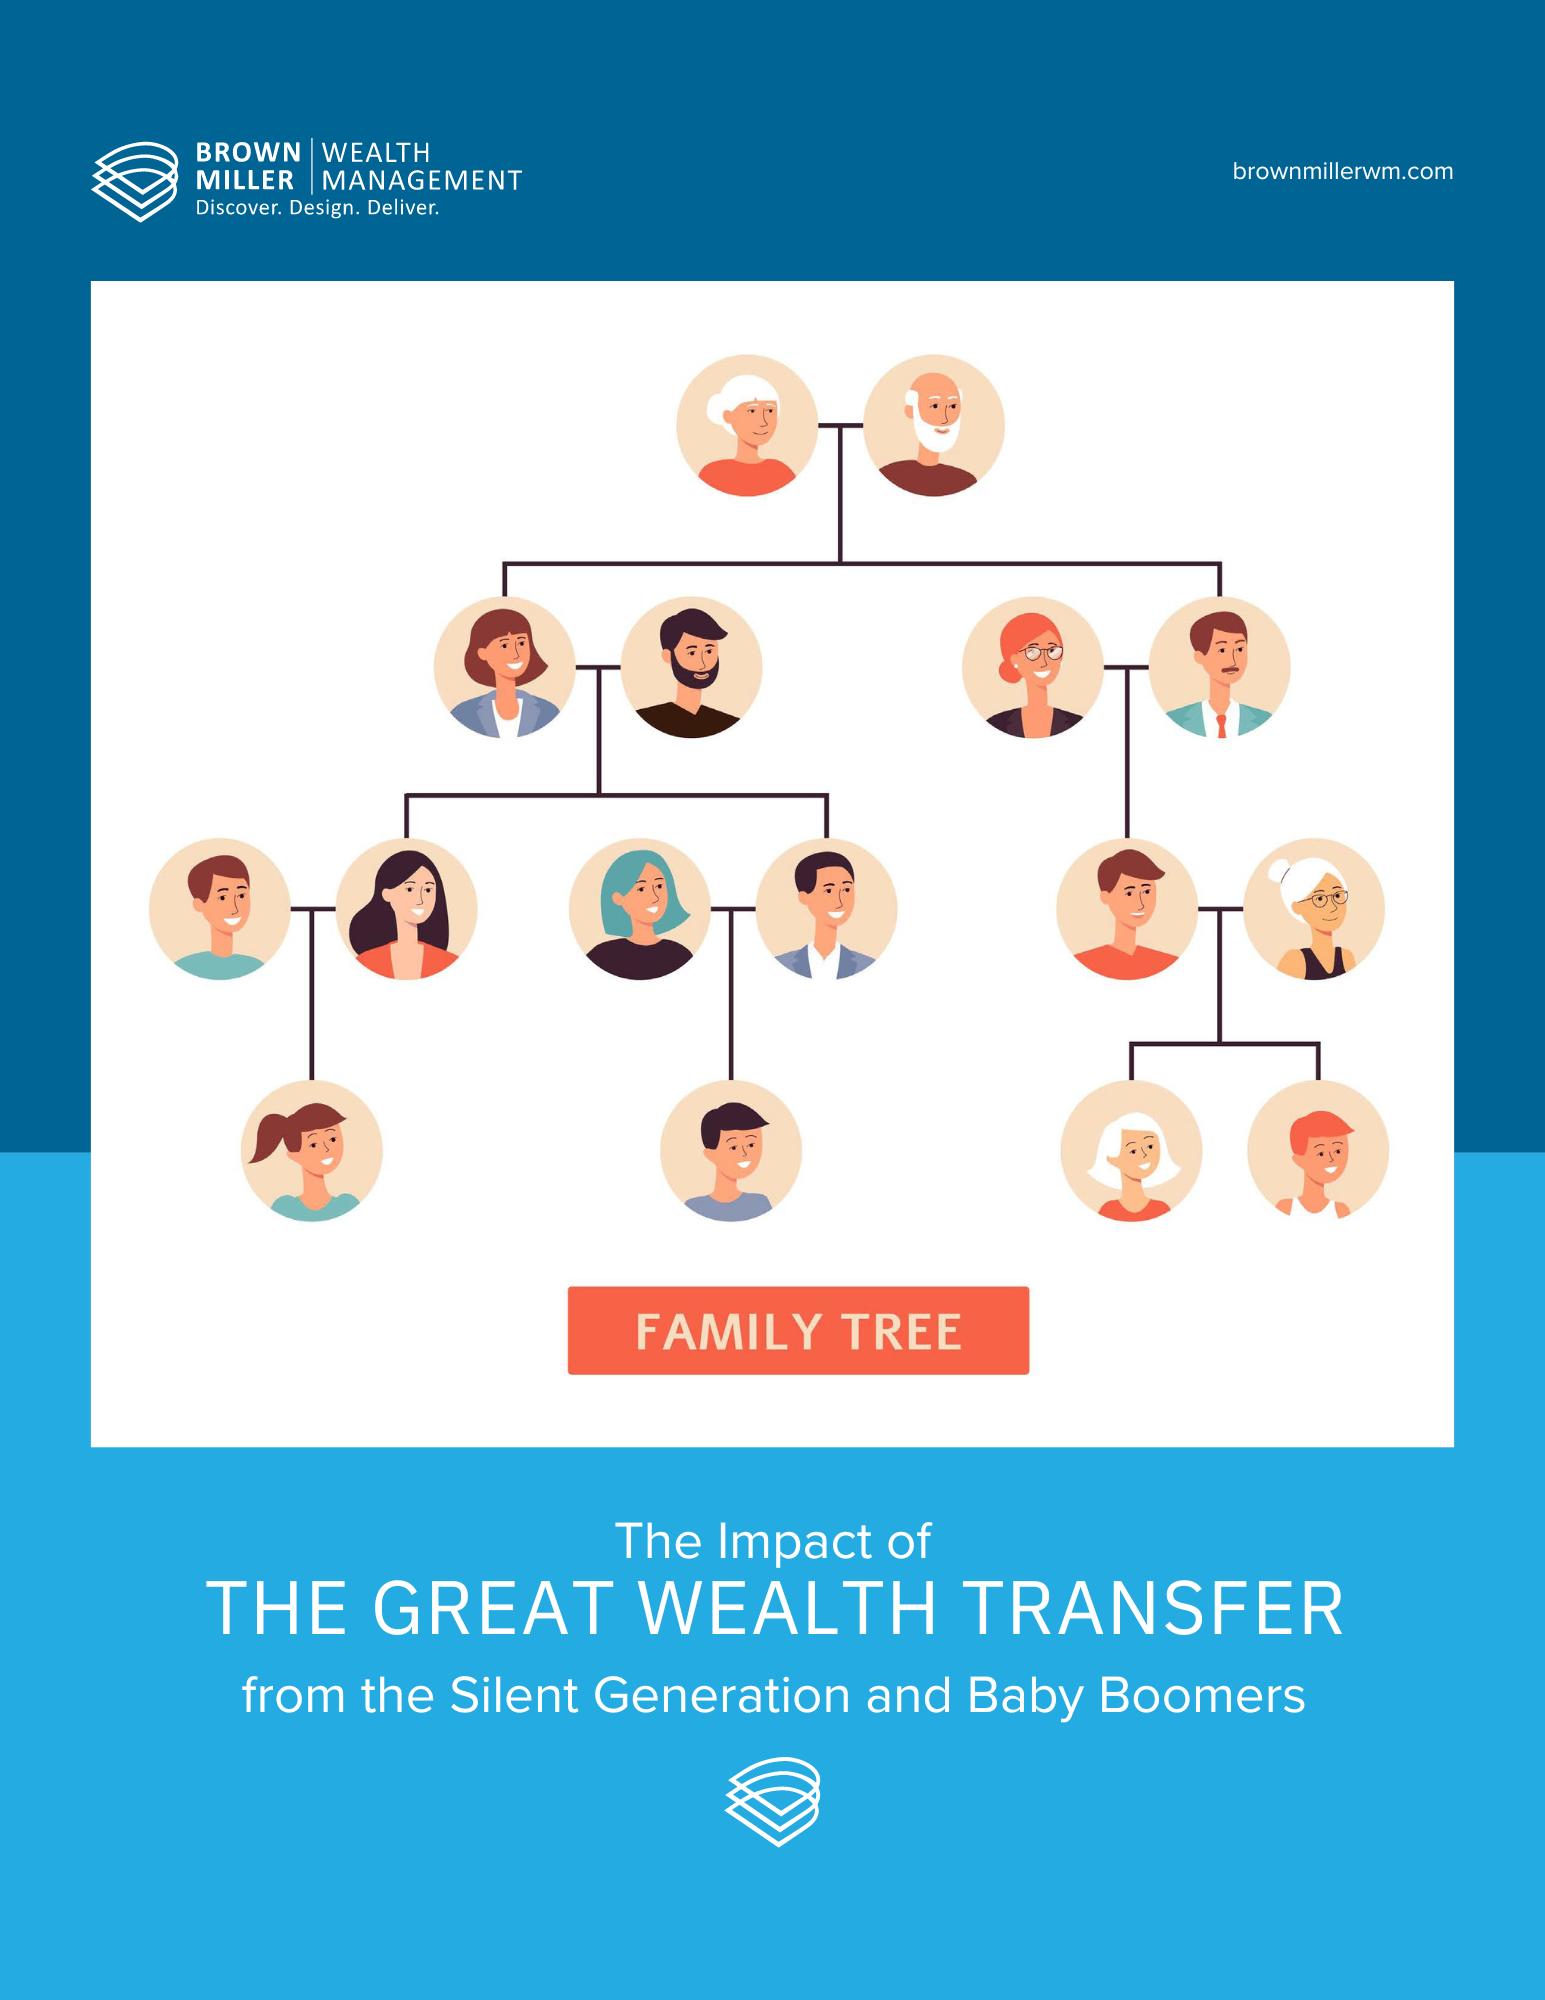 eBook_ The Impact of the Great Wealth Transfer (1) cover.pdf